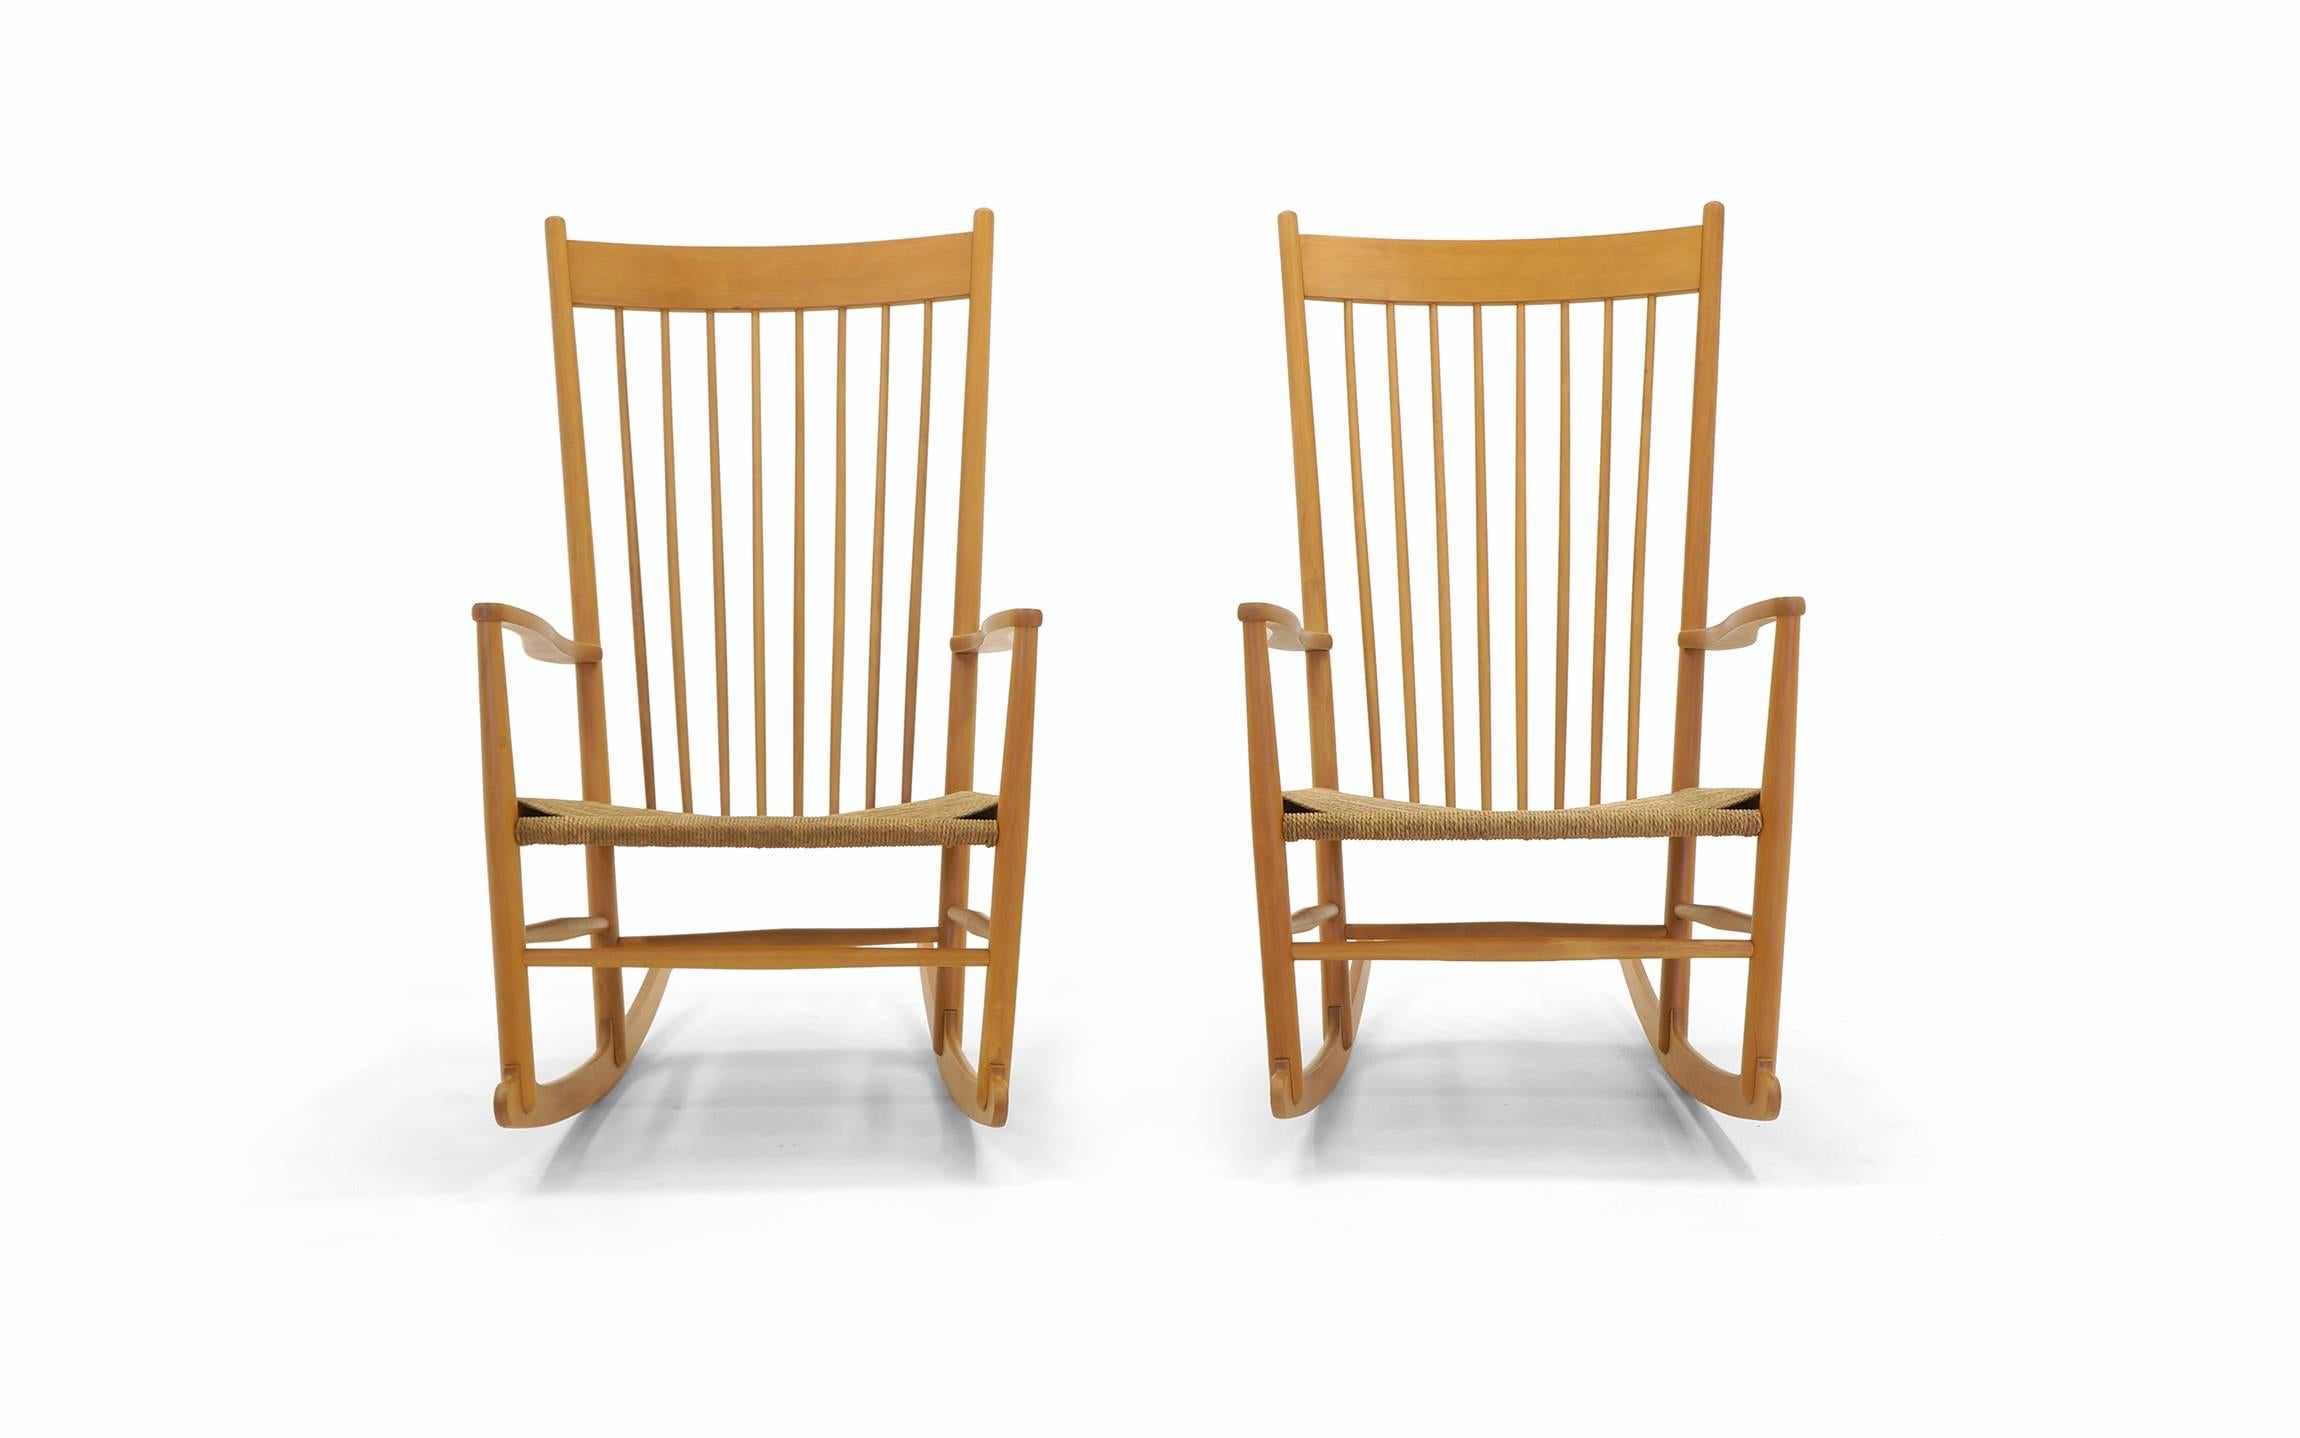 Excellent pair of J-16 rockers designed by Hans Wegner. These are earlier examples, all original. Overall dimensions are below. Additional dimensions: Chair seat is 18.5 inches deep and 22.5 inches wide.